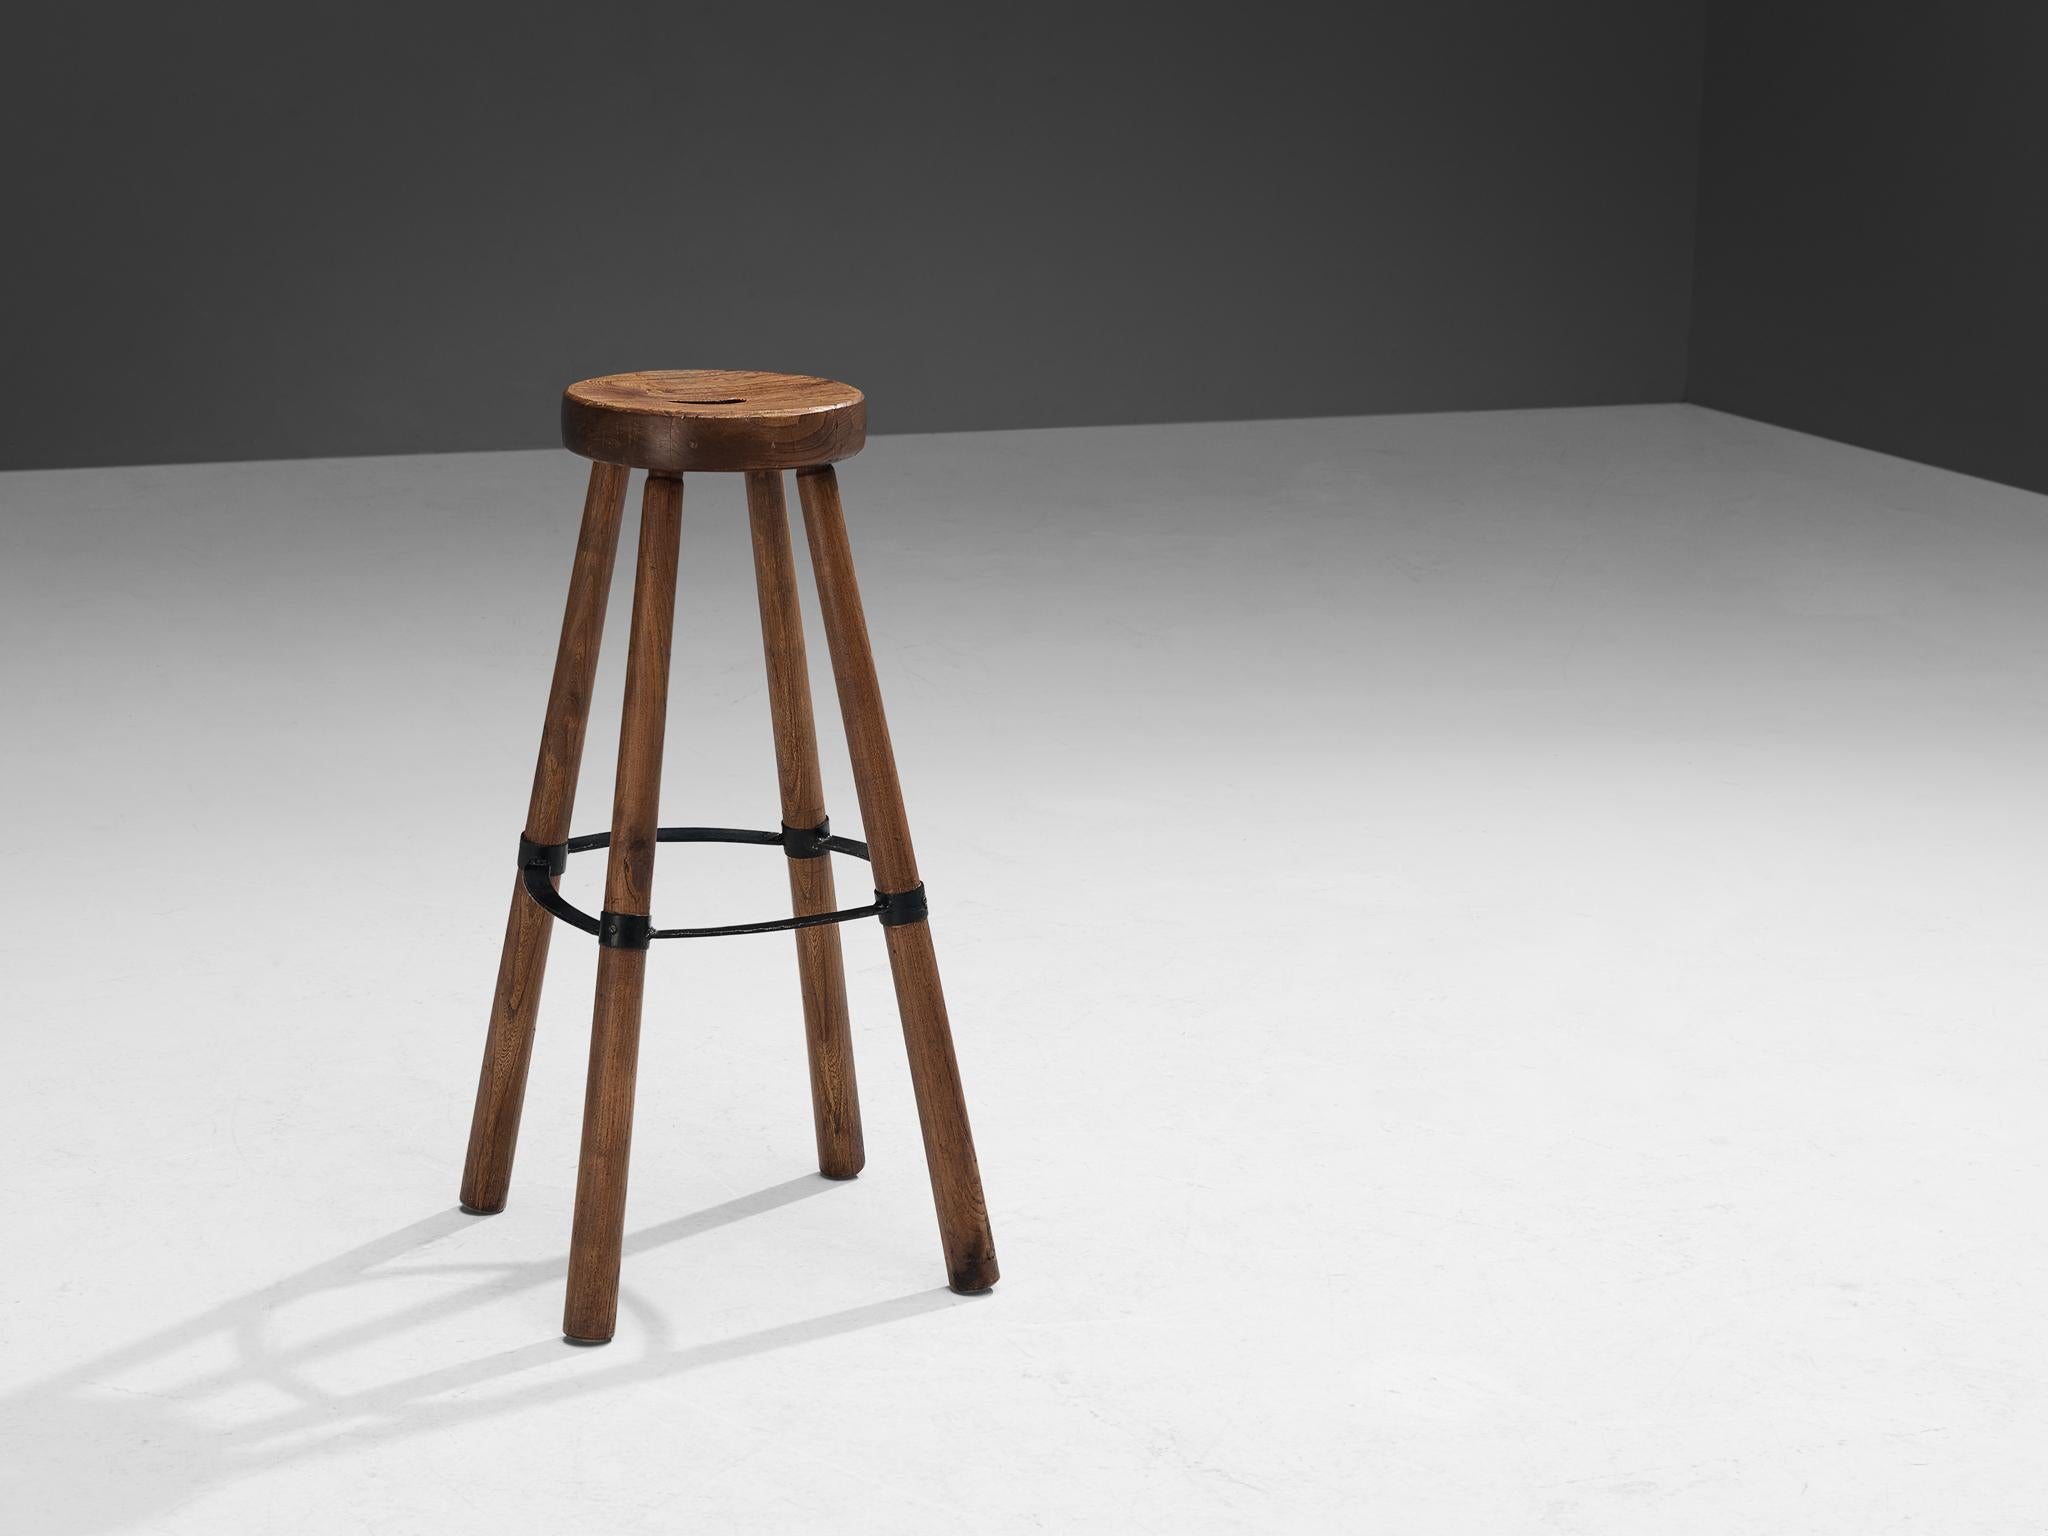 Bar stool, metal, beech, France, 1960s.

Sturdy stool in beech made in France in the 1960s. This piece shows a beautiful patina formed over time by using A nice feature is the metal ring around the crux of the stool, providing sturdiness and a mix